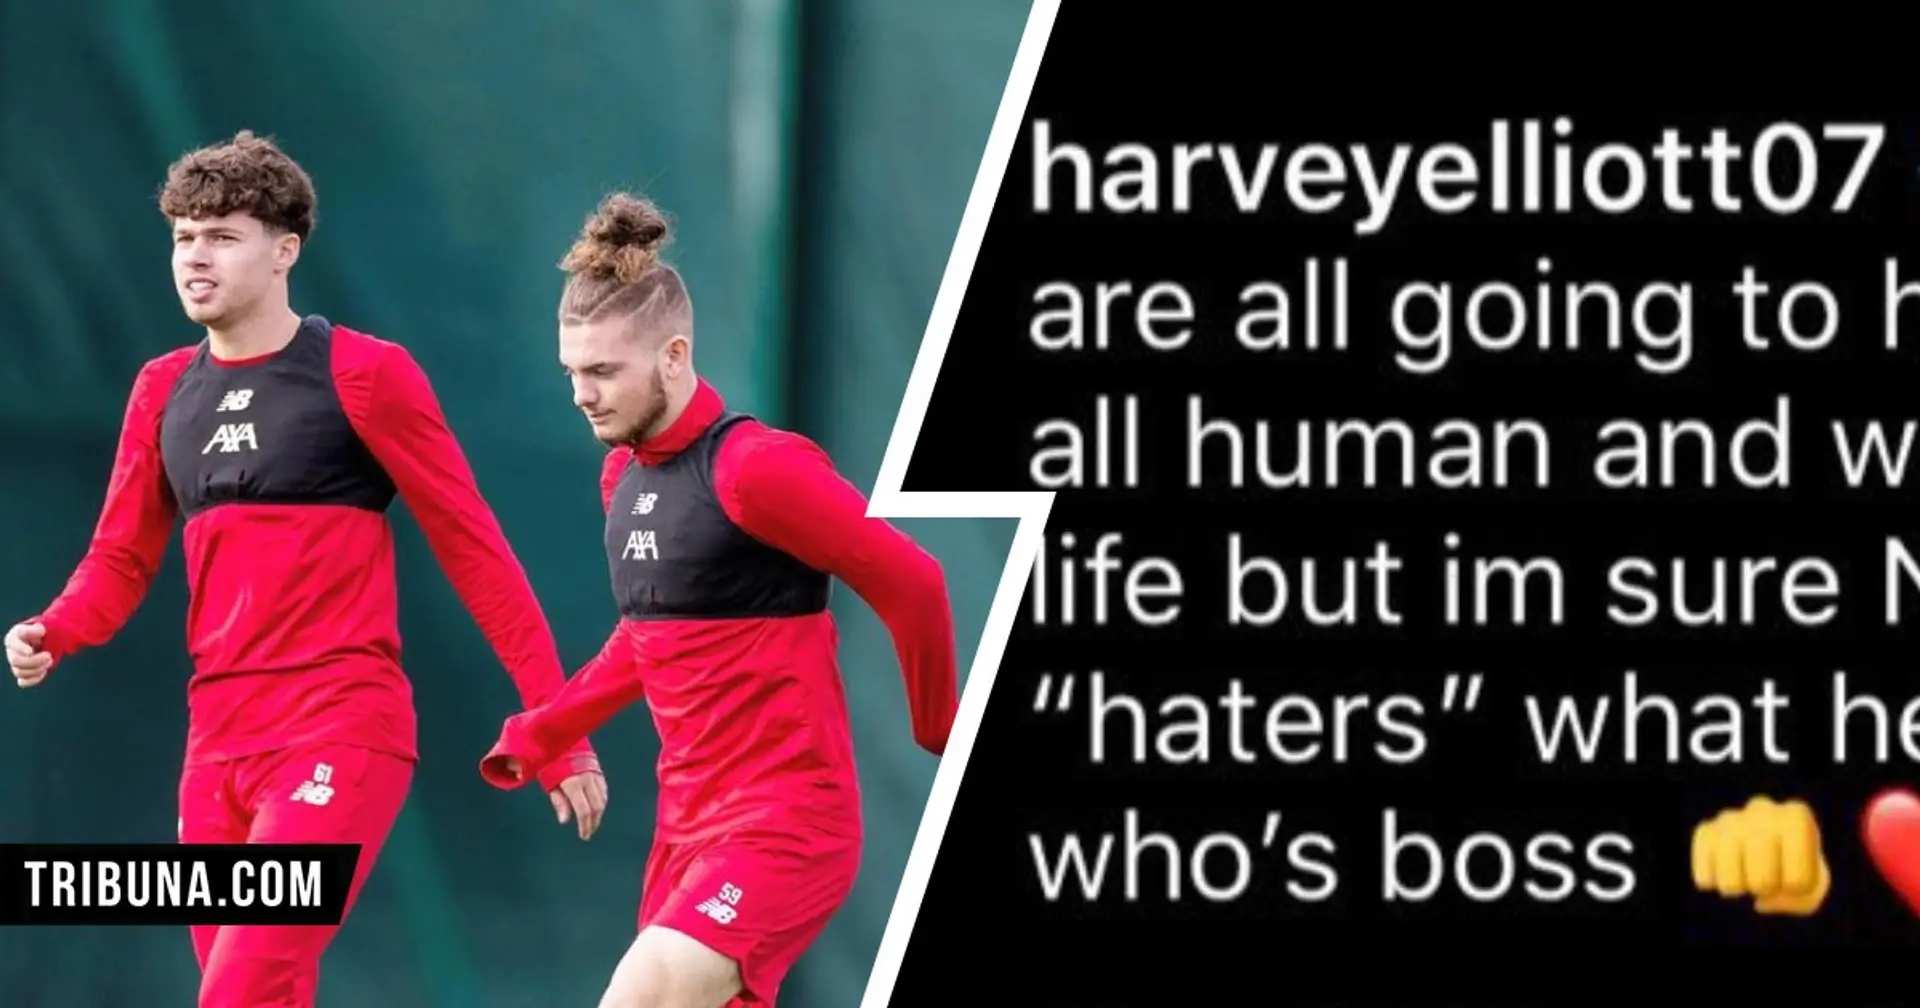 'All keyboard warriors - Neco will show them who's boss!': Harvey Elliott backs his friend in strong message